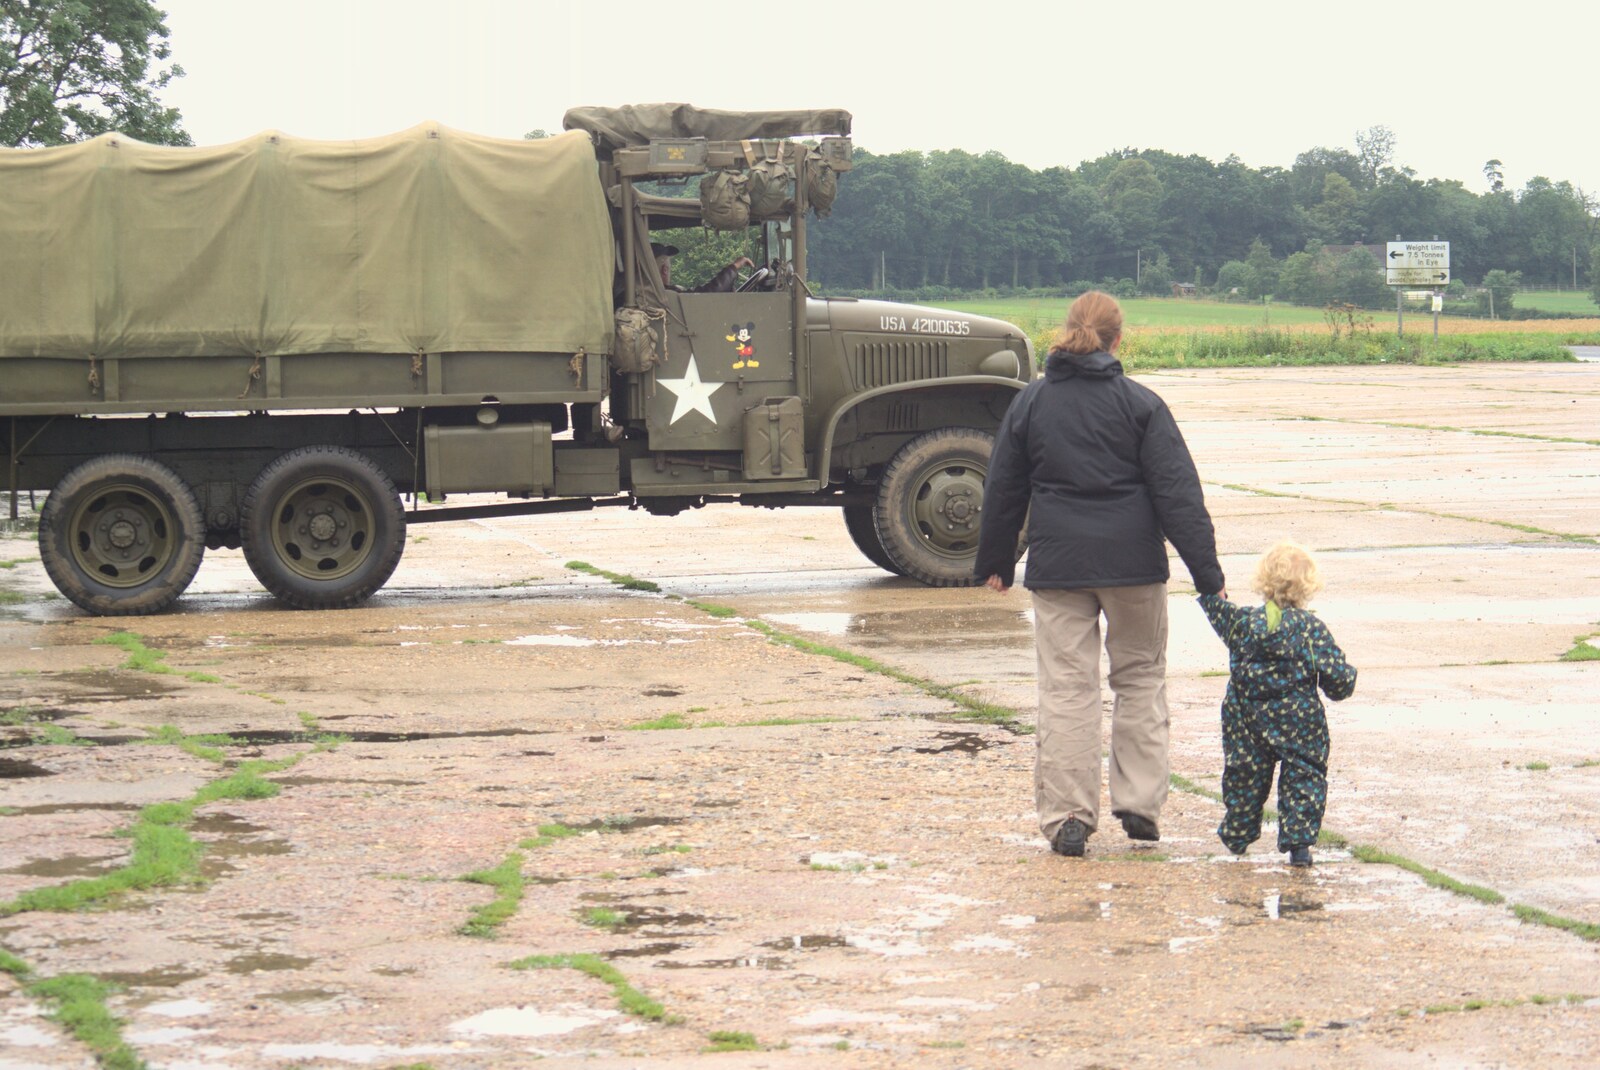 Isobel and Fred go to look from Clive's Military Vehicle Convoy, Brome Aerodrome, Suffolk - 16th July 2011